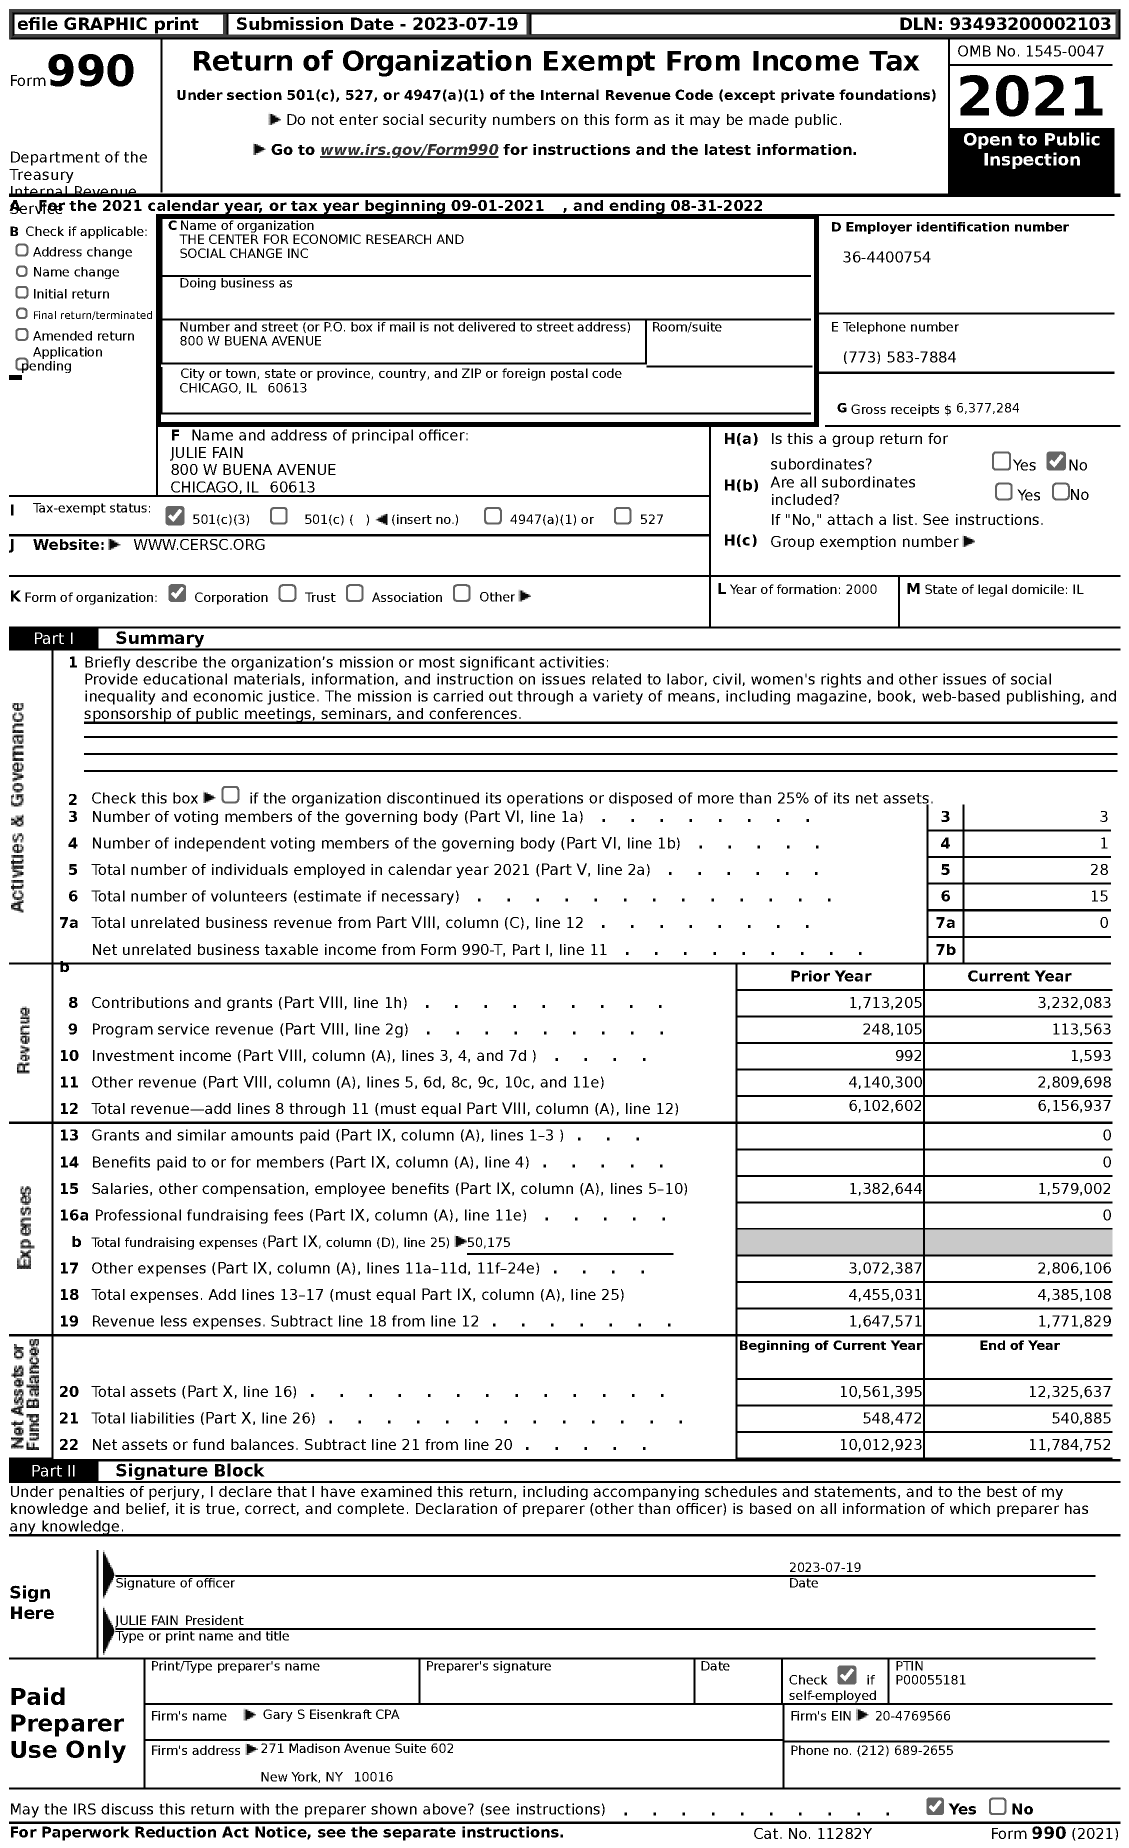 Image of first page of 2021 Form 990 for Center for Economic Research and Social Change